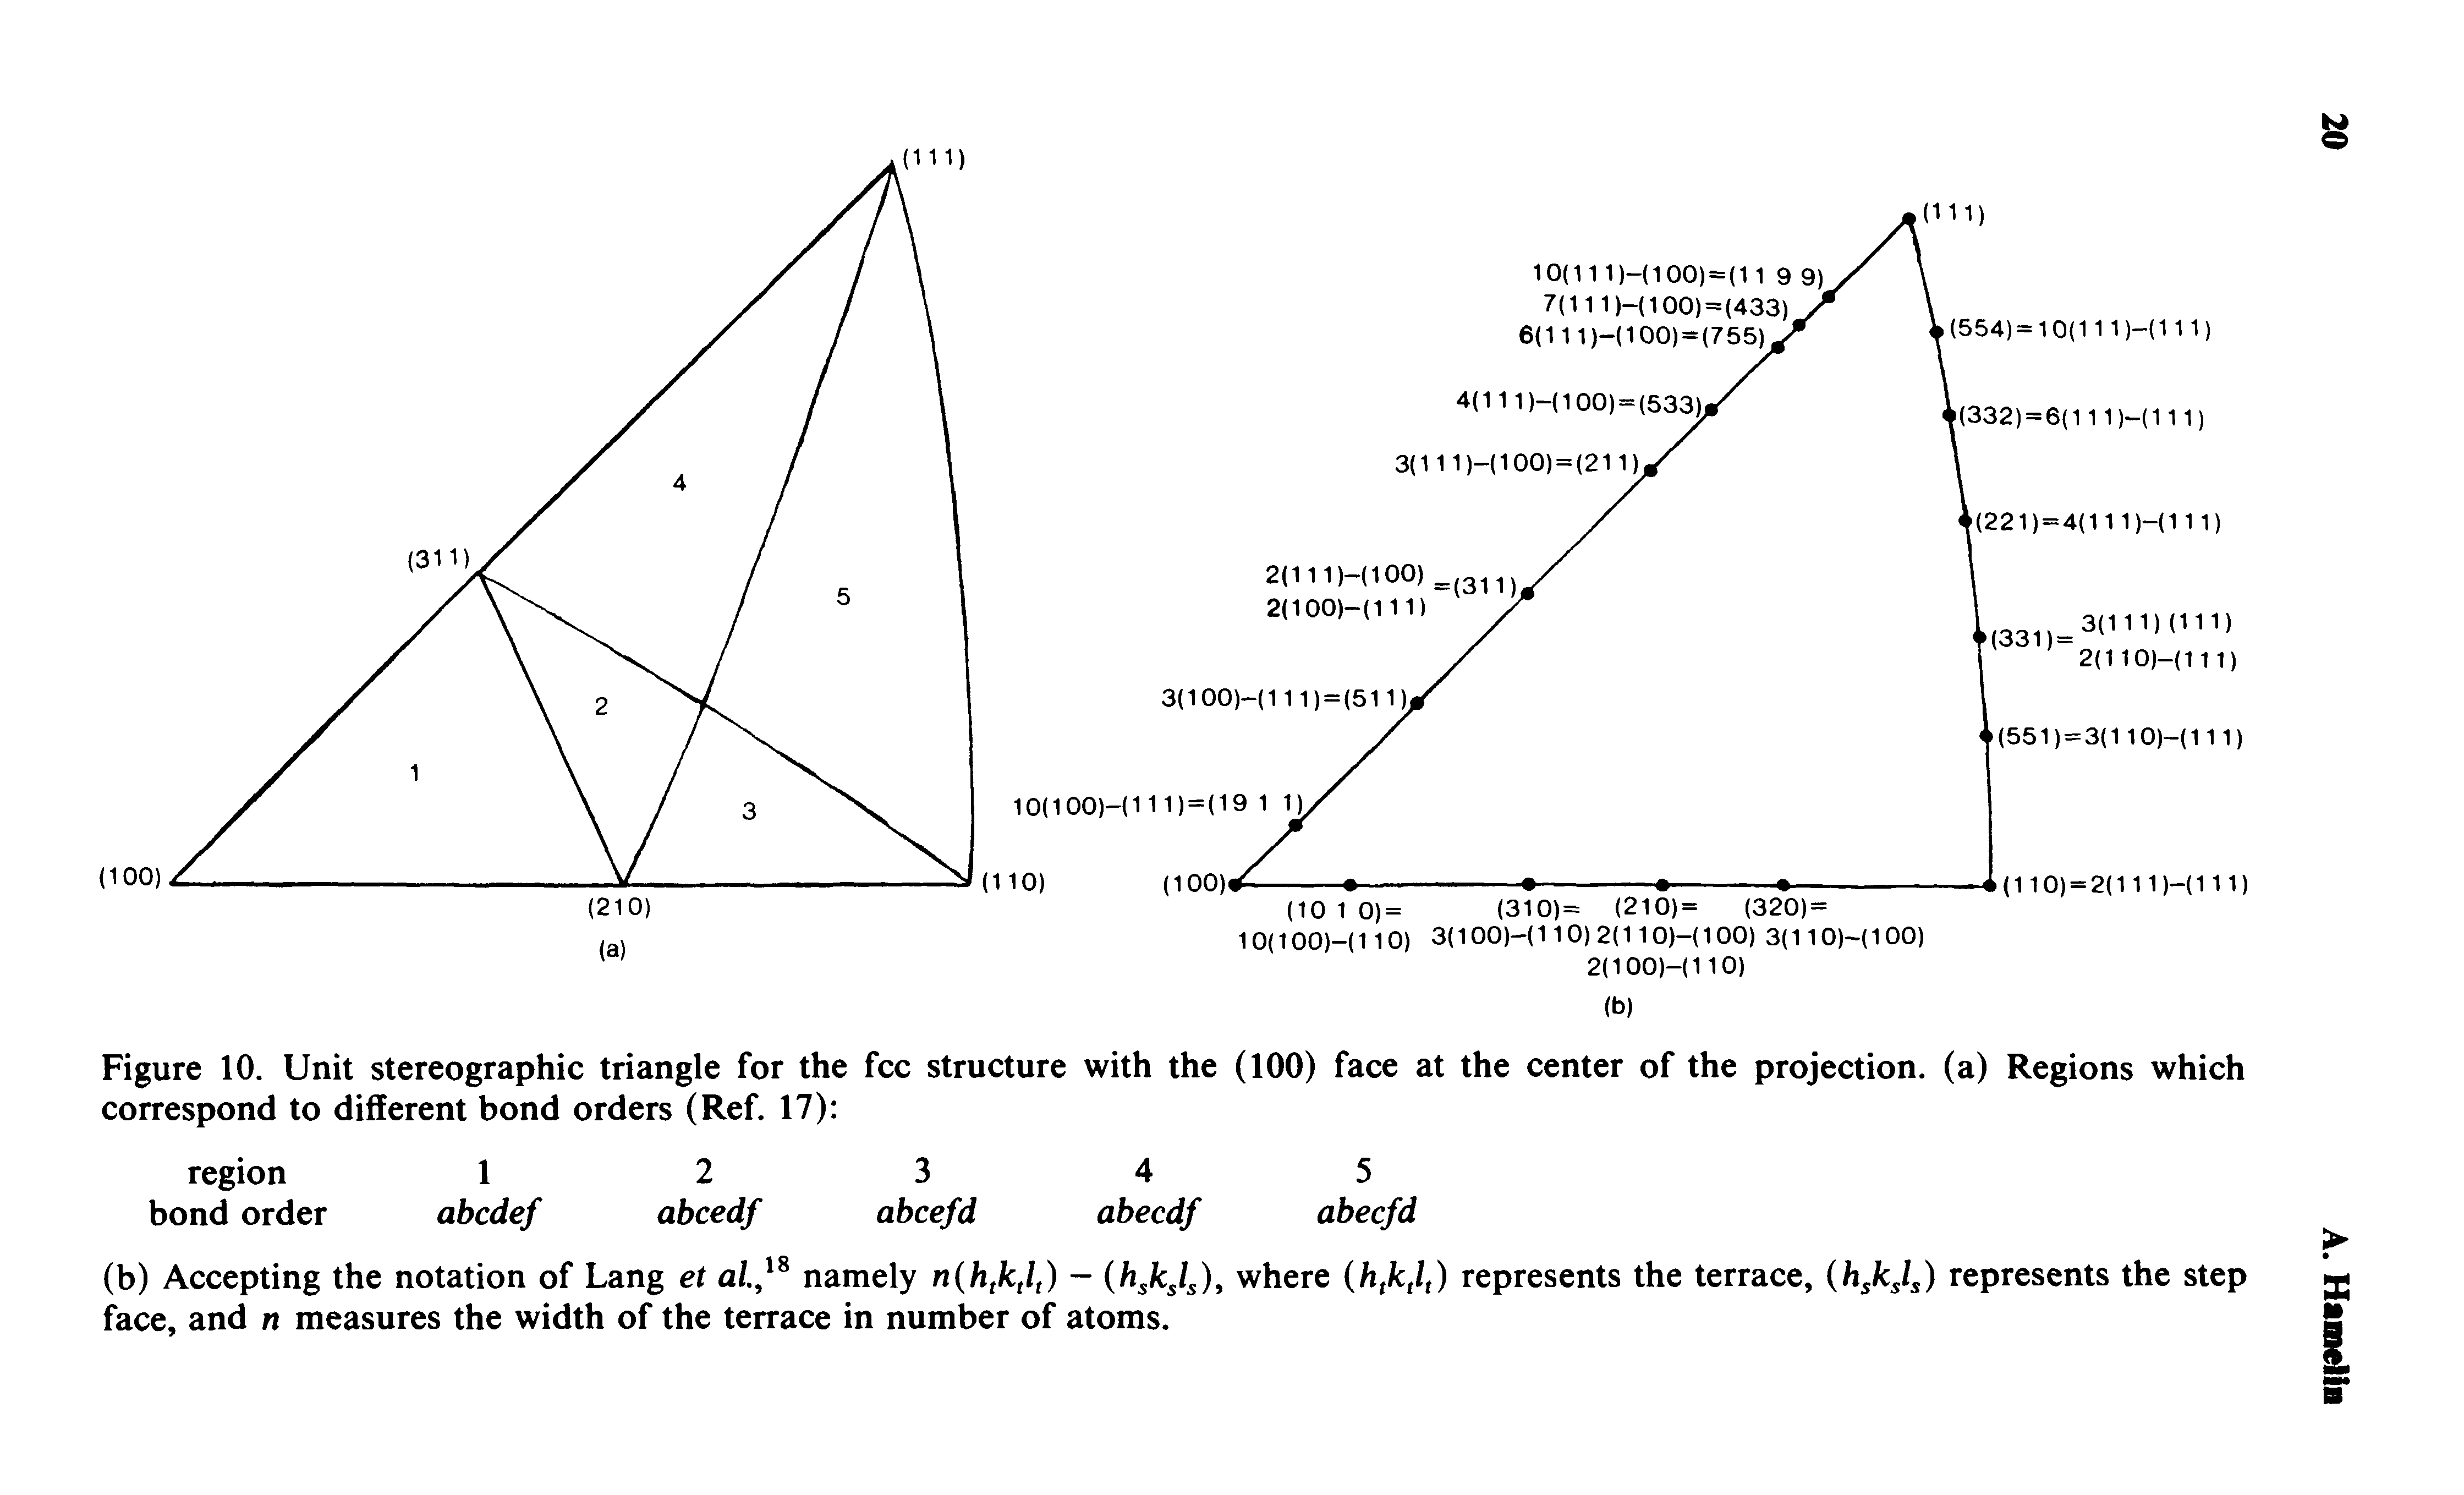 Figure 10. Unit stereographic triangle for the fee structure with the (100) face at the center of the projection, (a) Regions which correspond to different bond orders (Ref. 17) ...